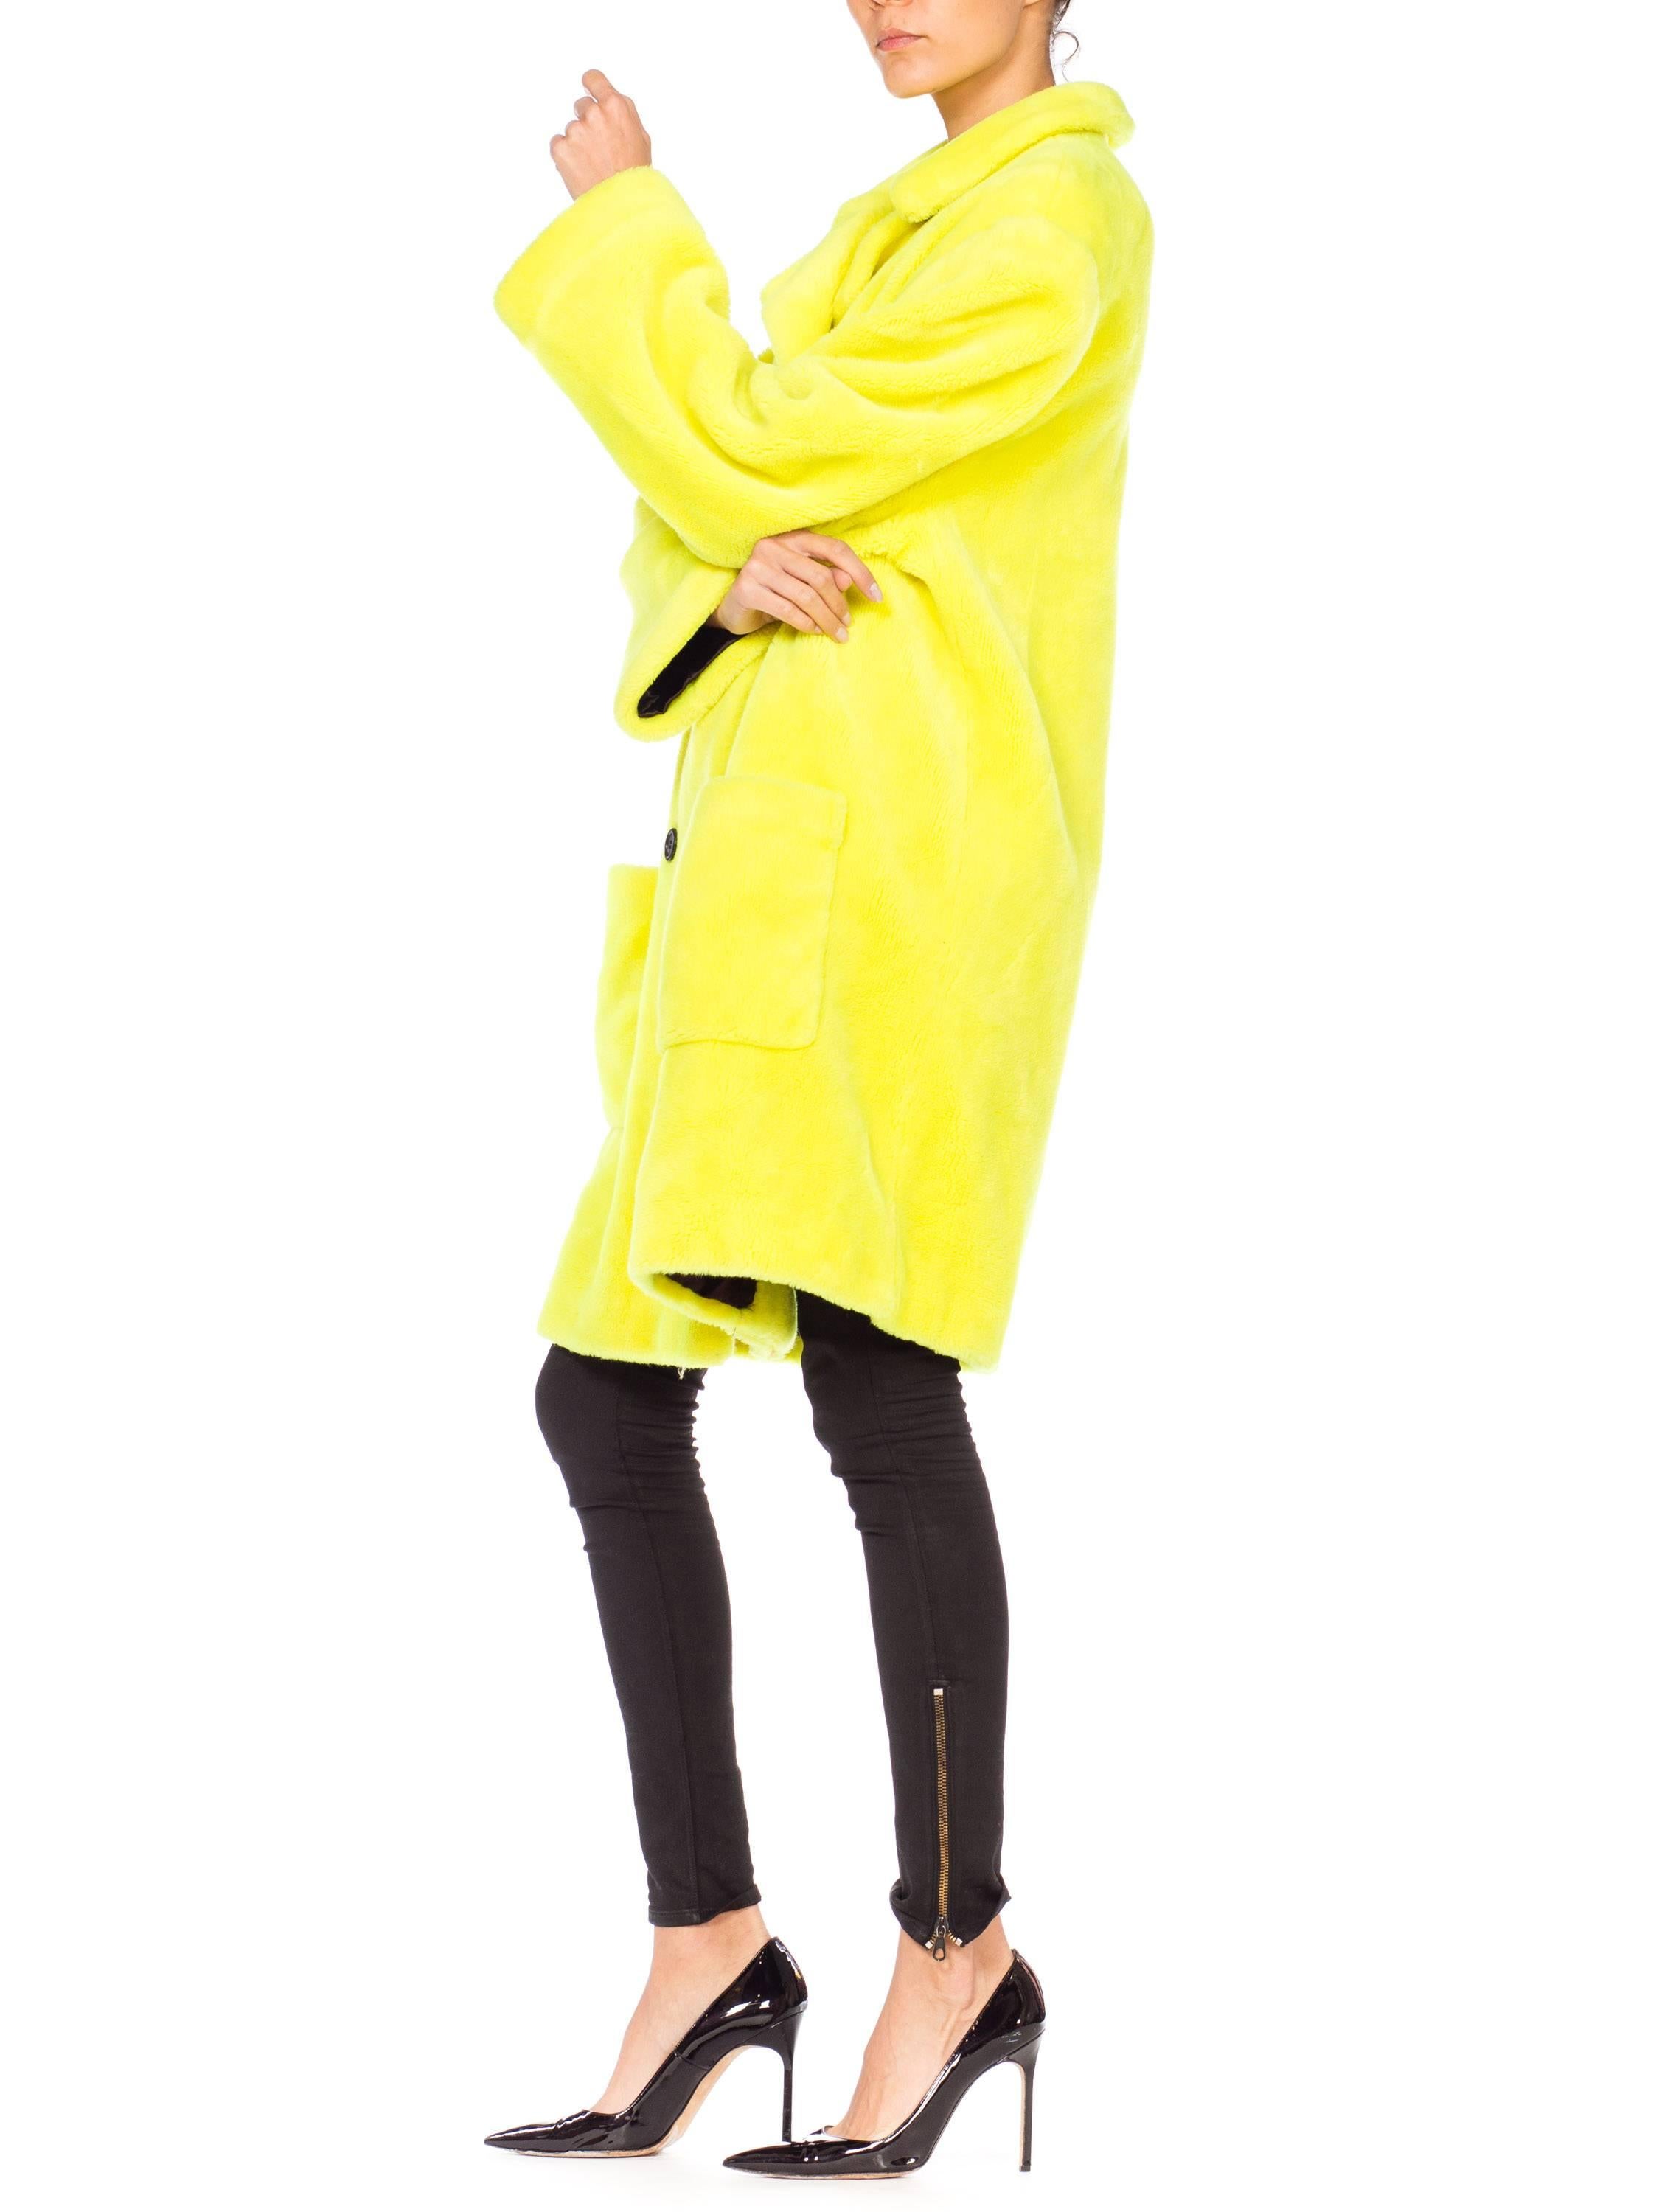 Stephen Sprouse Oversized Highlighter Yellow Faux Fur Coat, 1980s  3